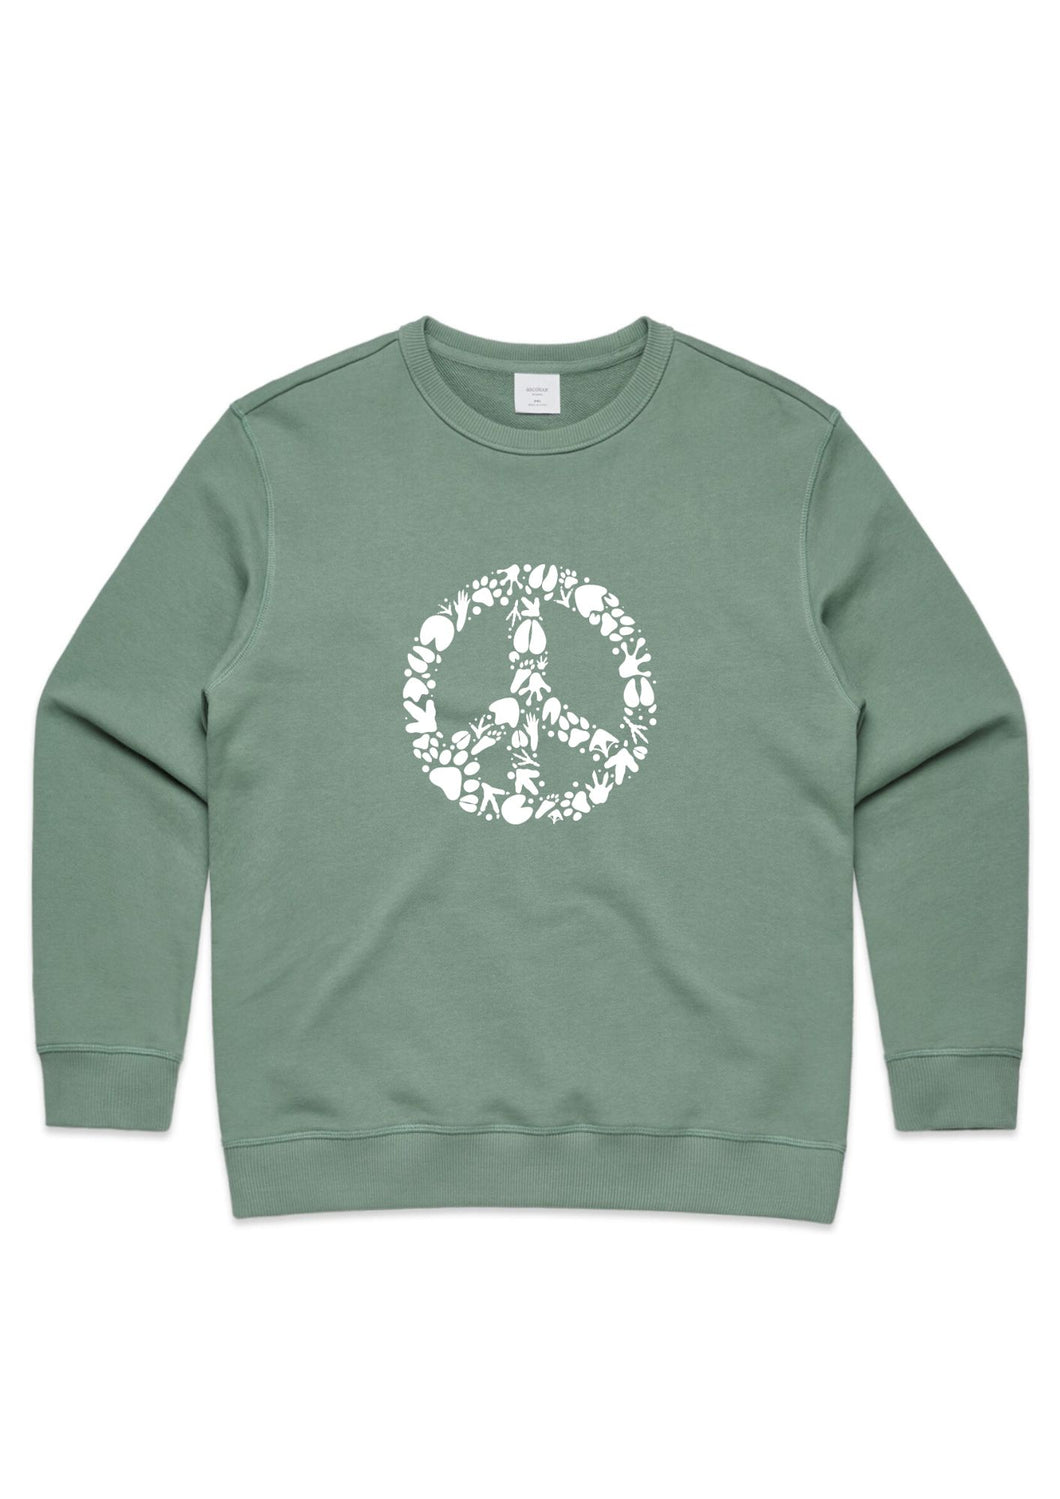 Limited Edition Peace Crew